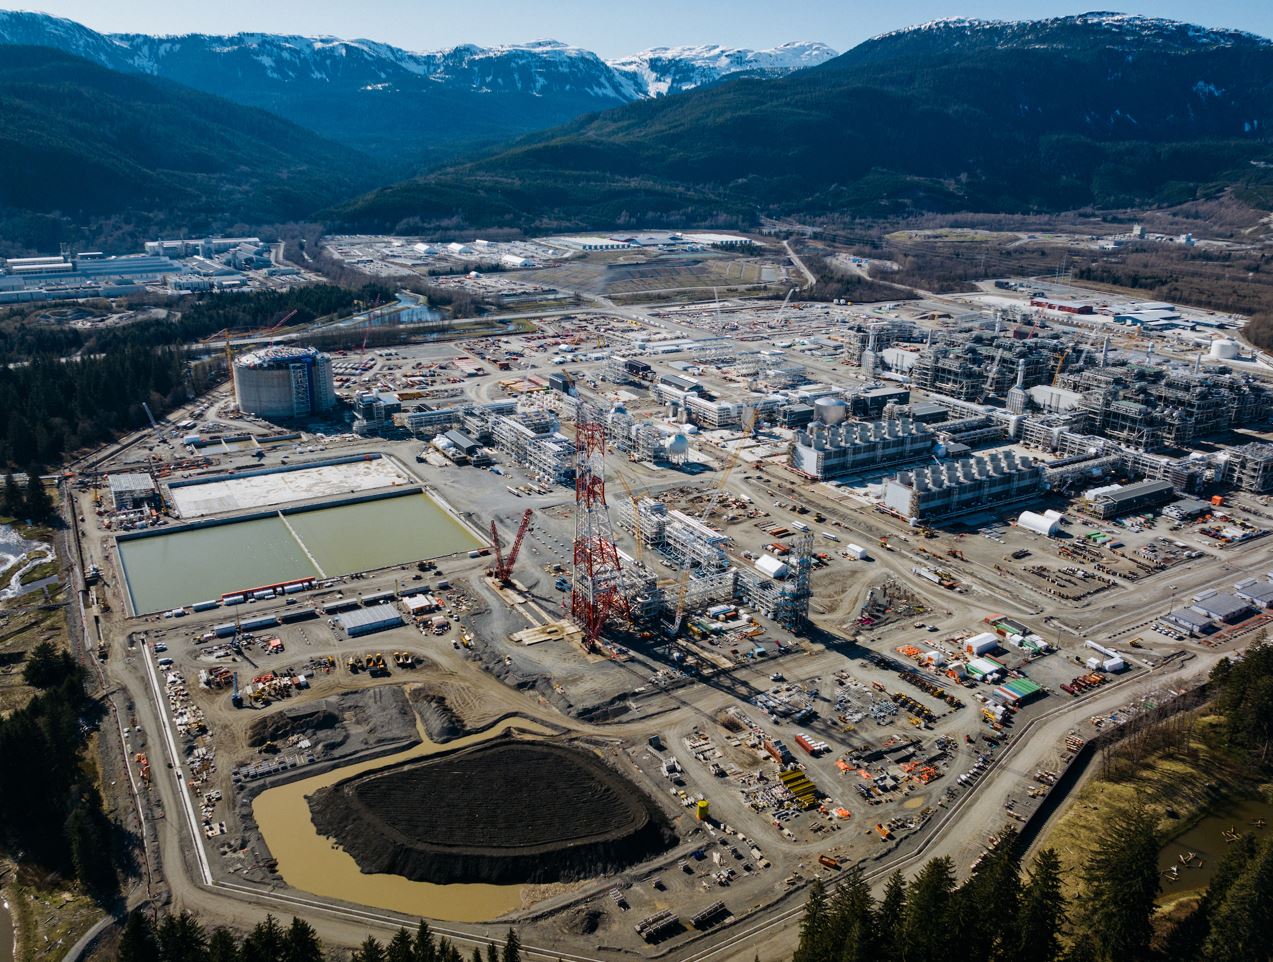 ServcoCanada Inc.’s Kitimat, BC subsidiary company acquired by WSG Energy Services